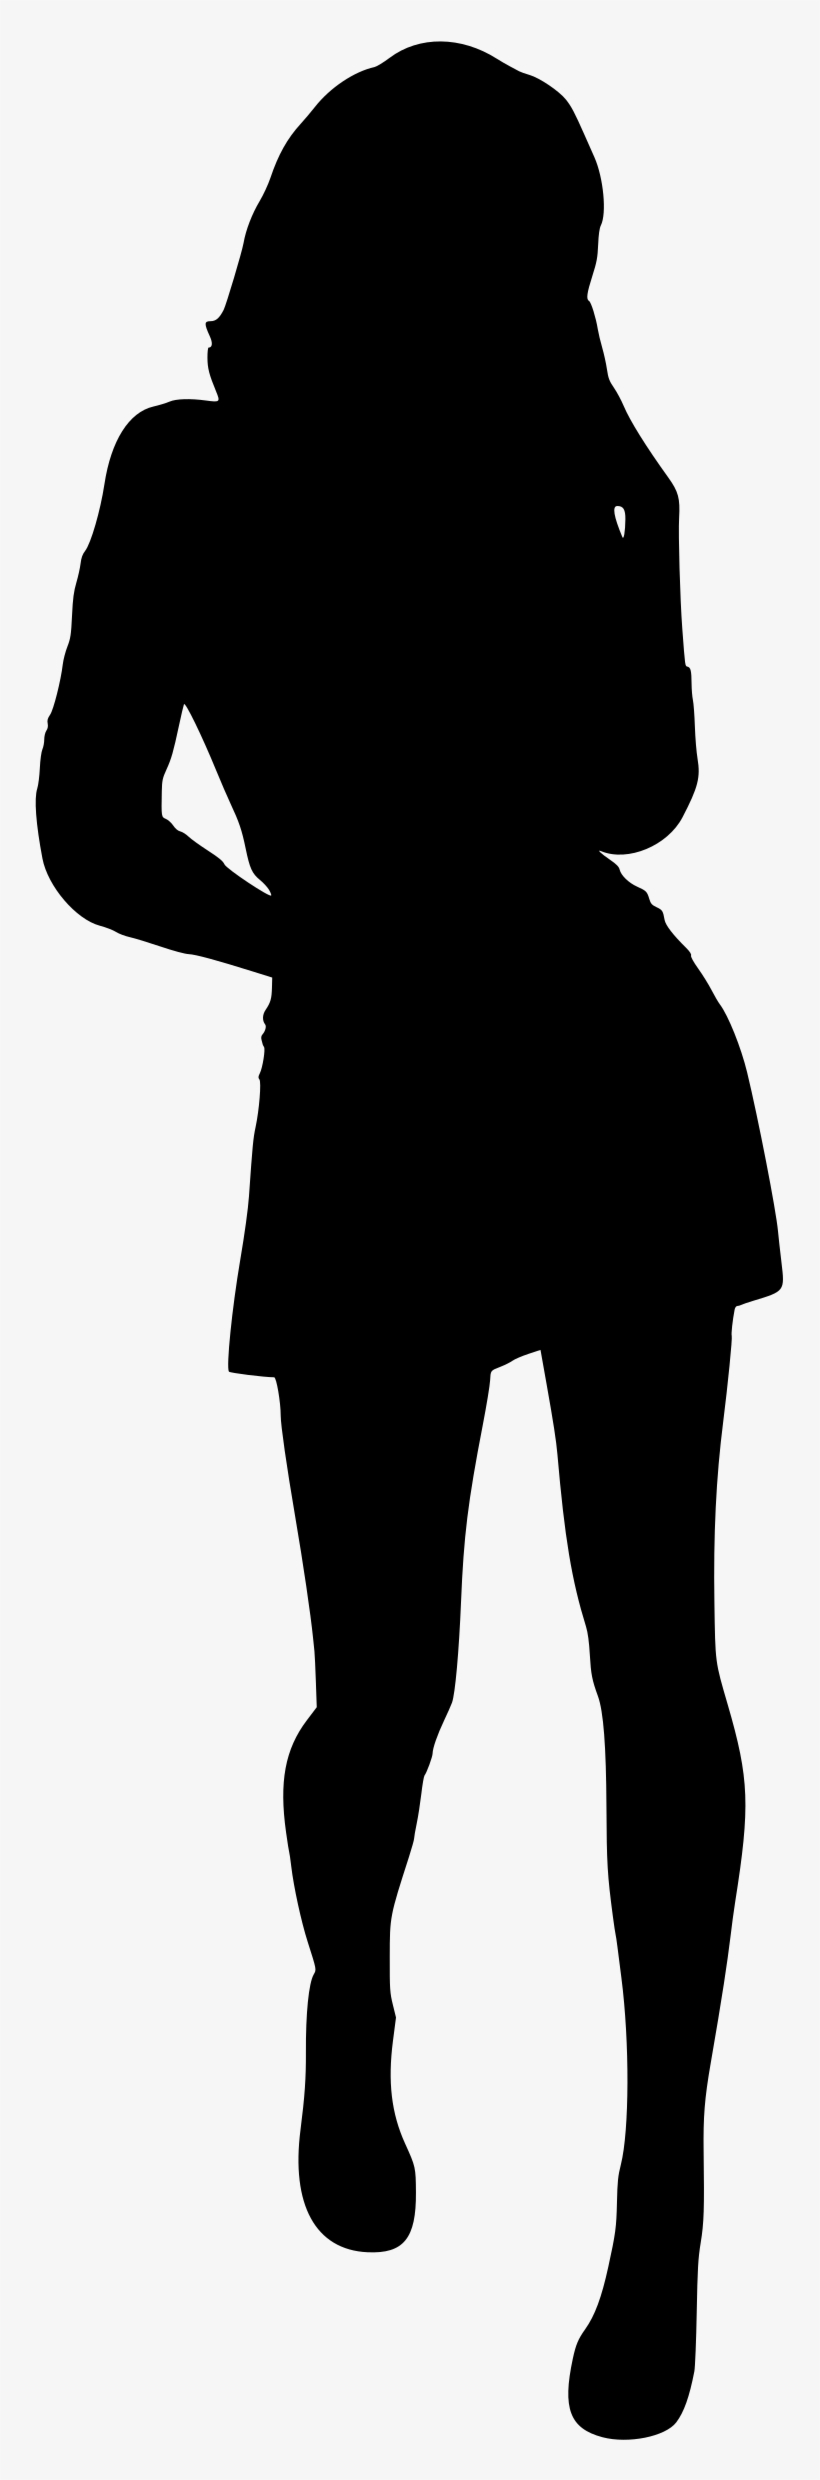 This Free Icons Png Design Of Woman Silhouette 4 - Woman Silhouette Pdf, transparent png #9895857